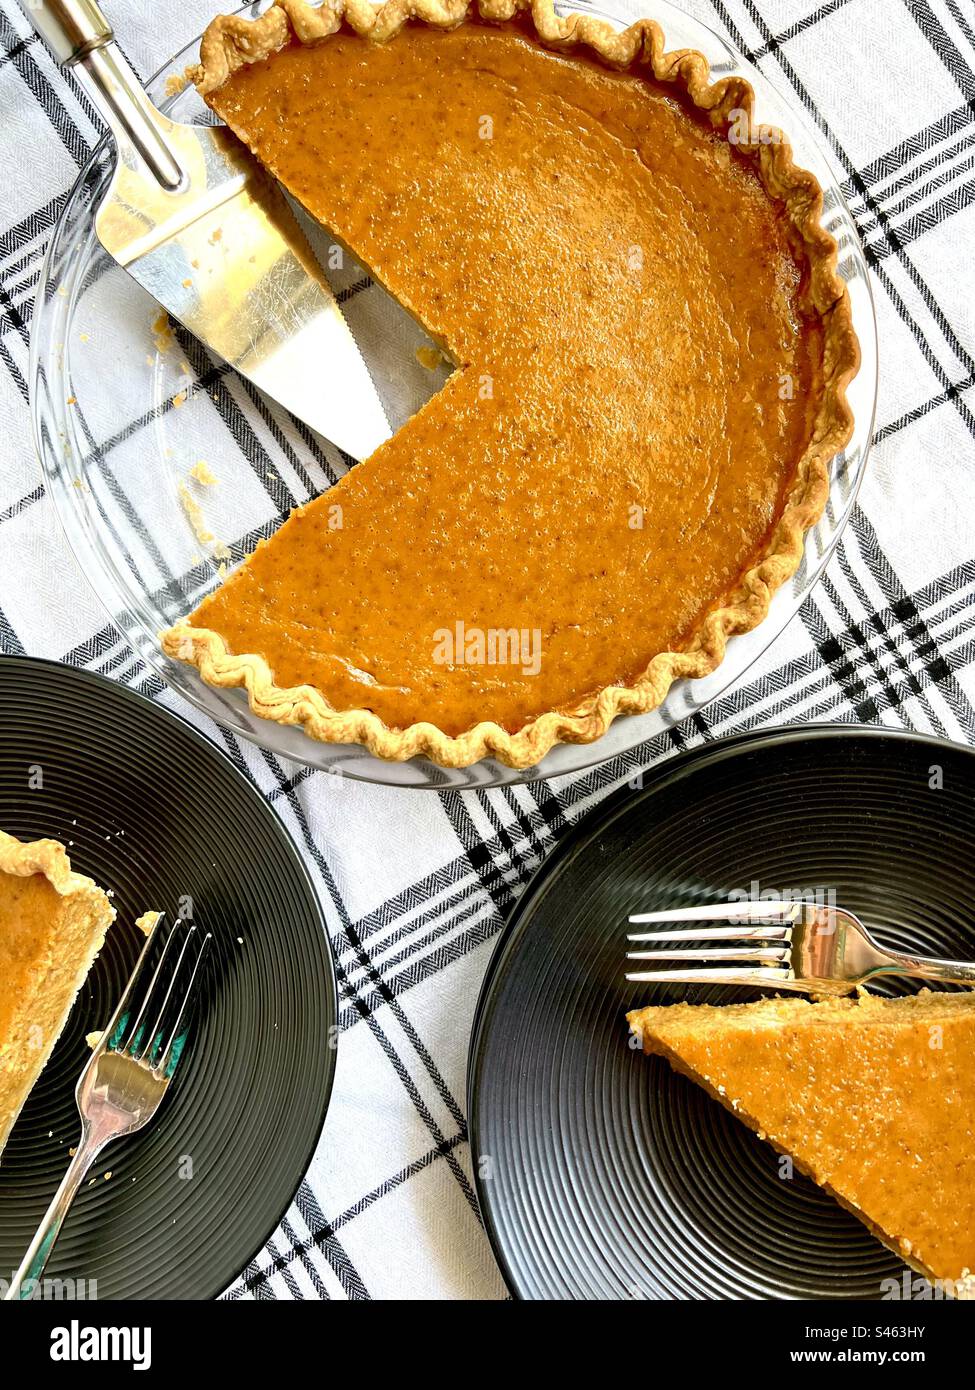 Freshly baked pumpkin pie on black plates seen from above Stock Photo